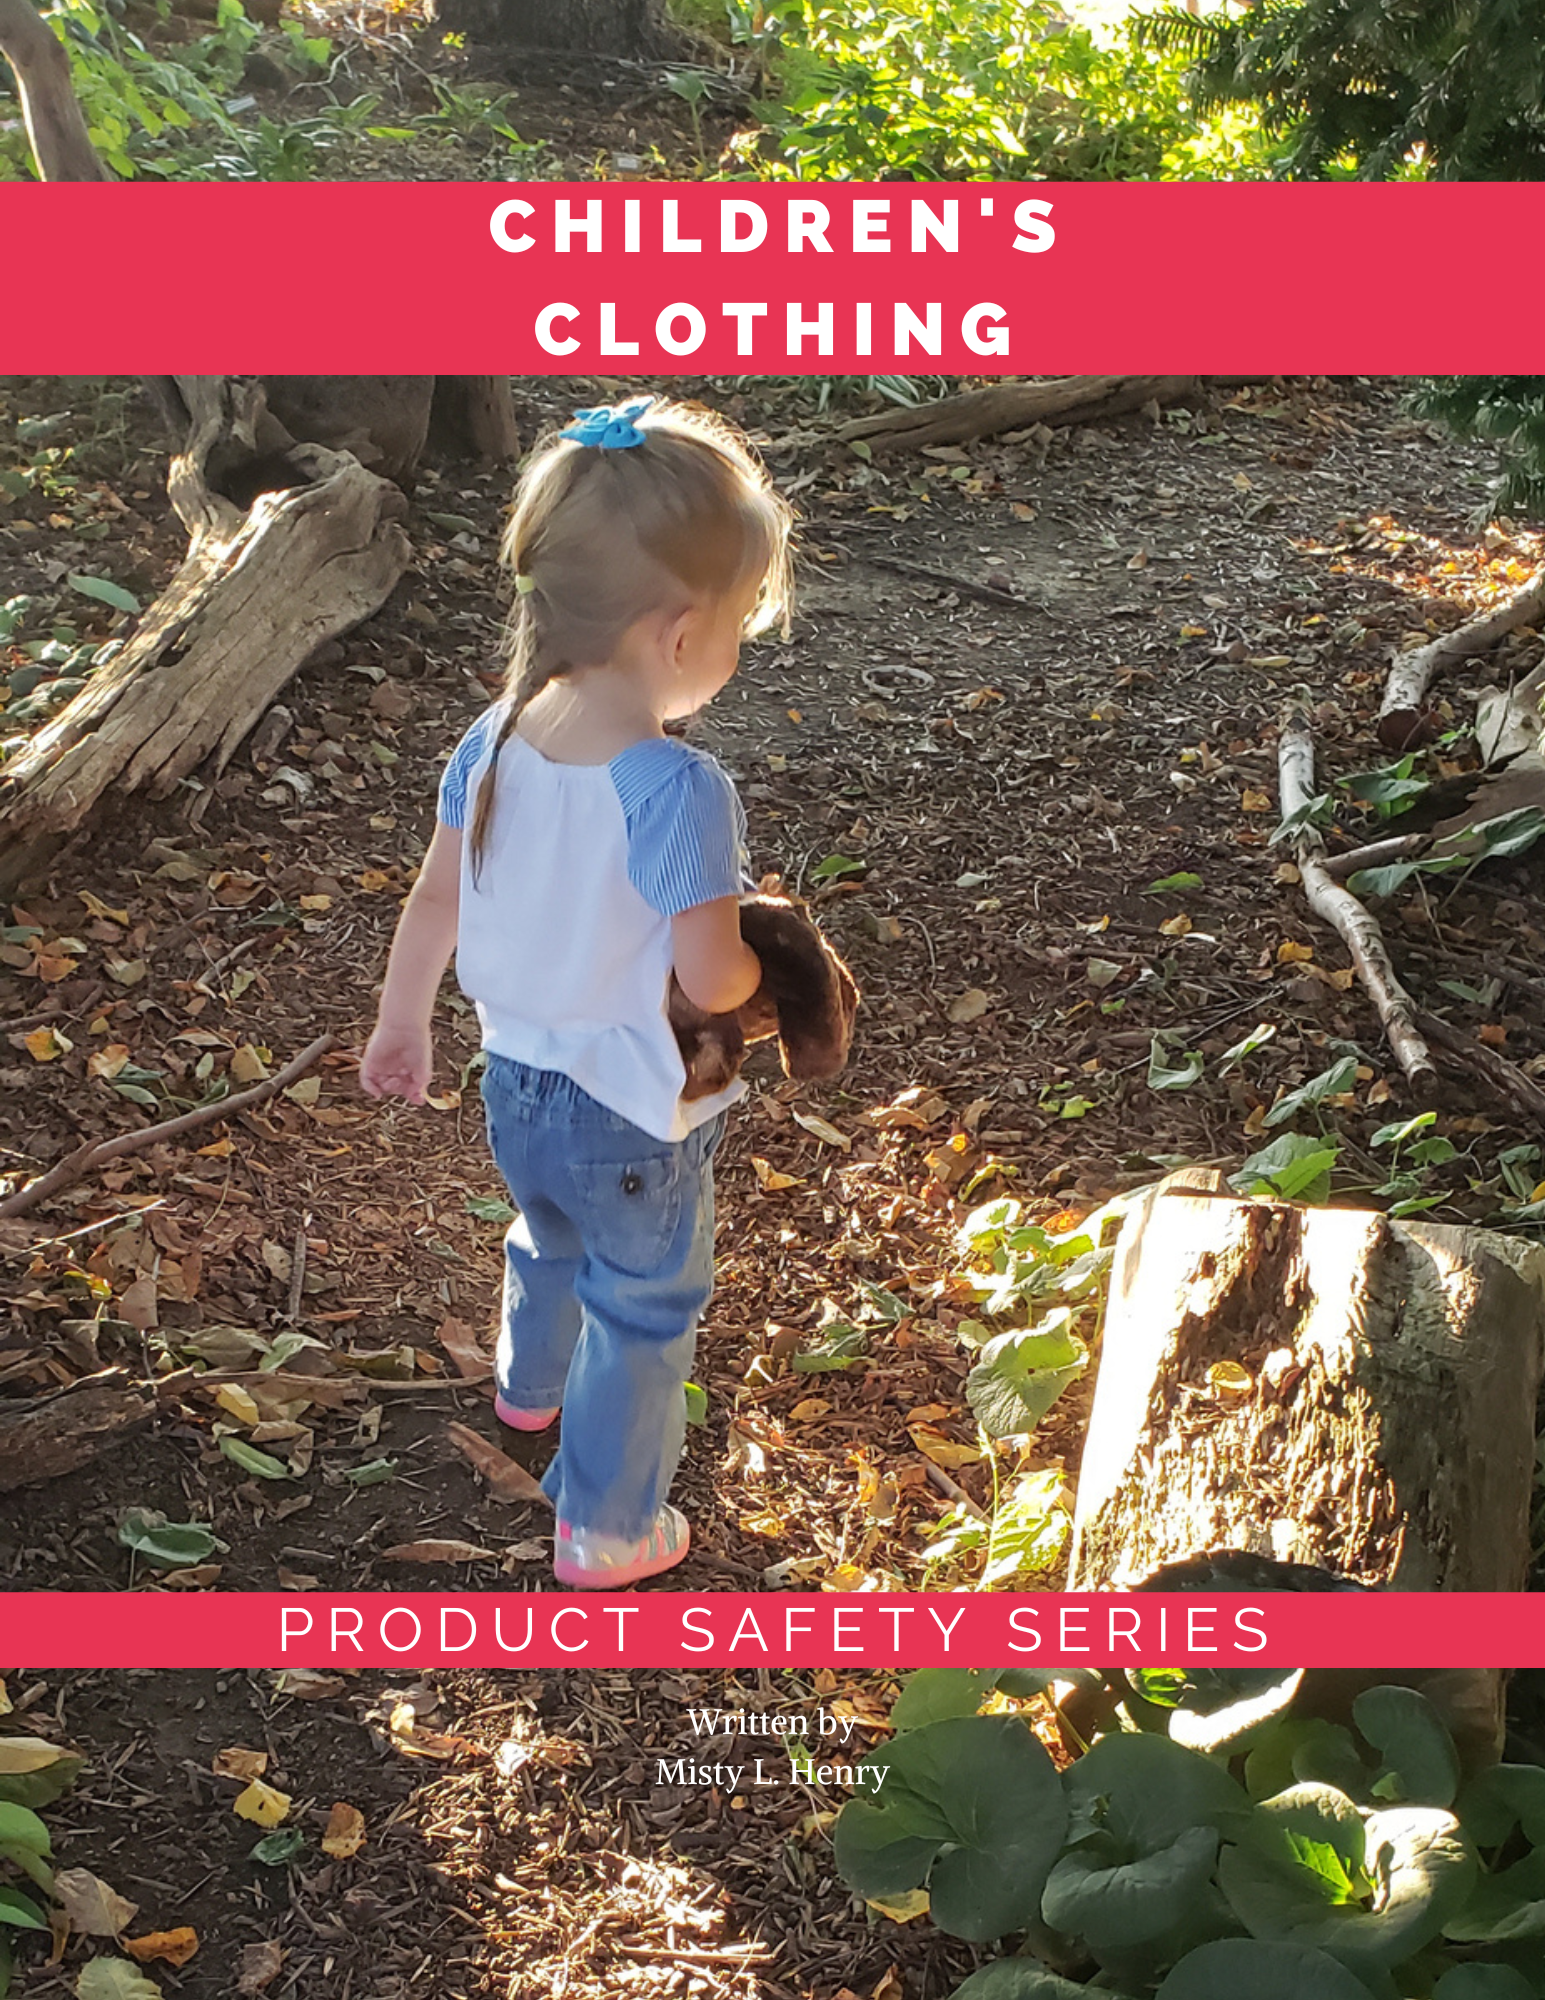 Children's Product Safety